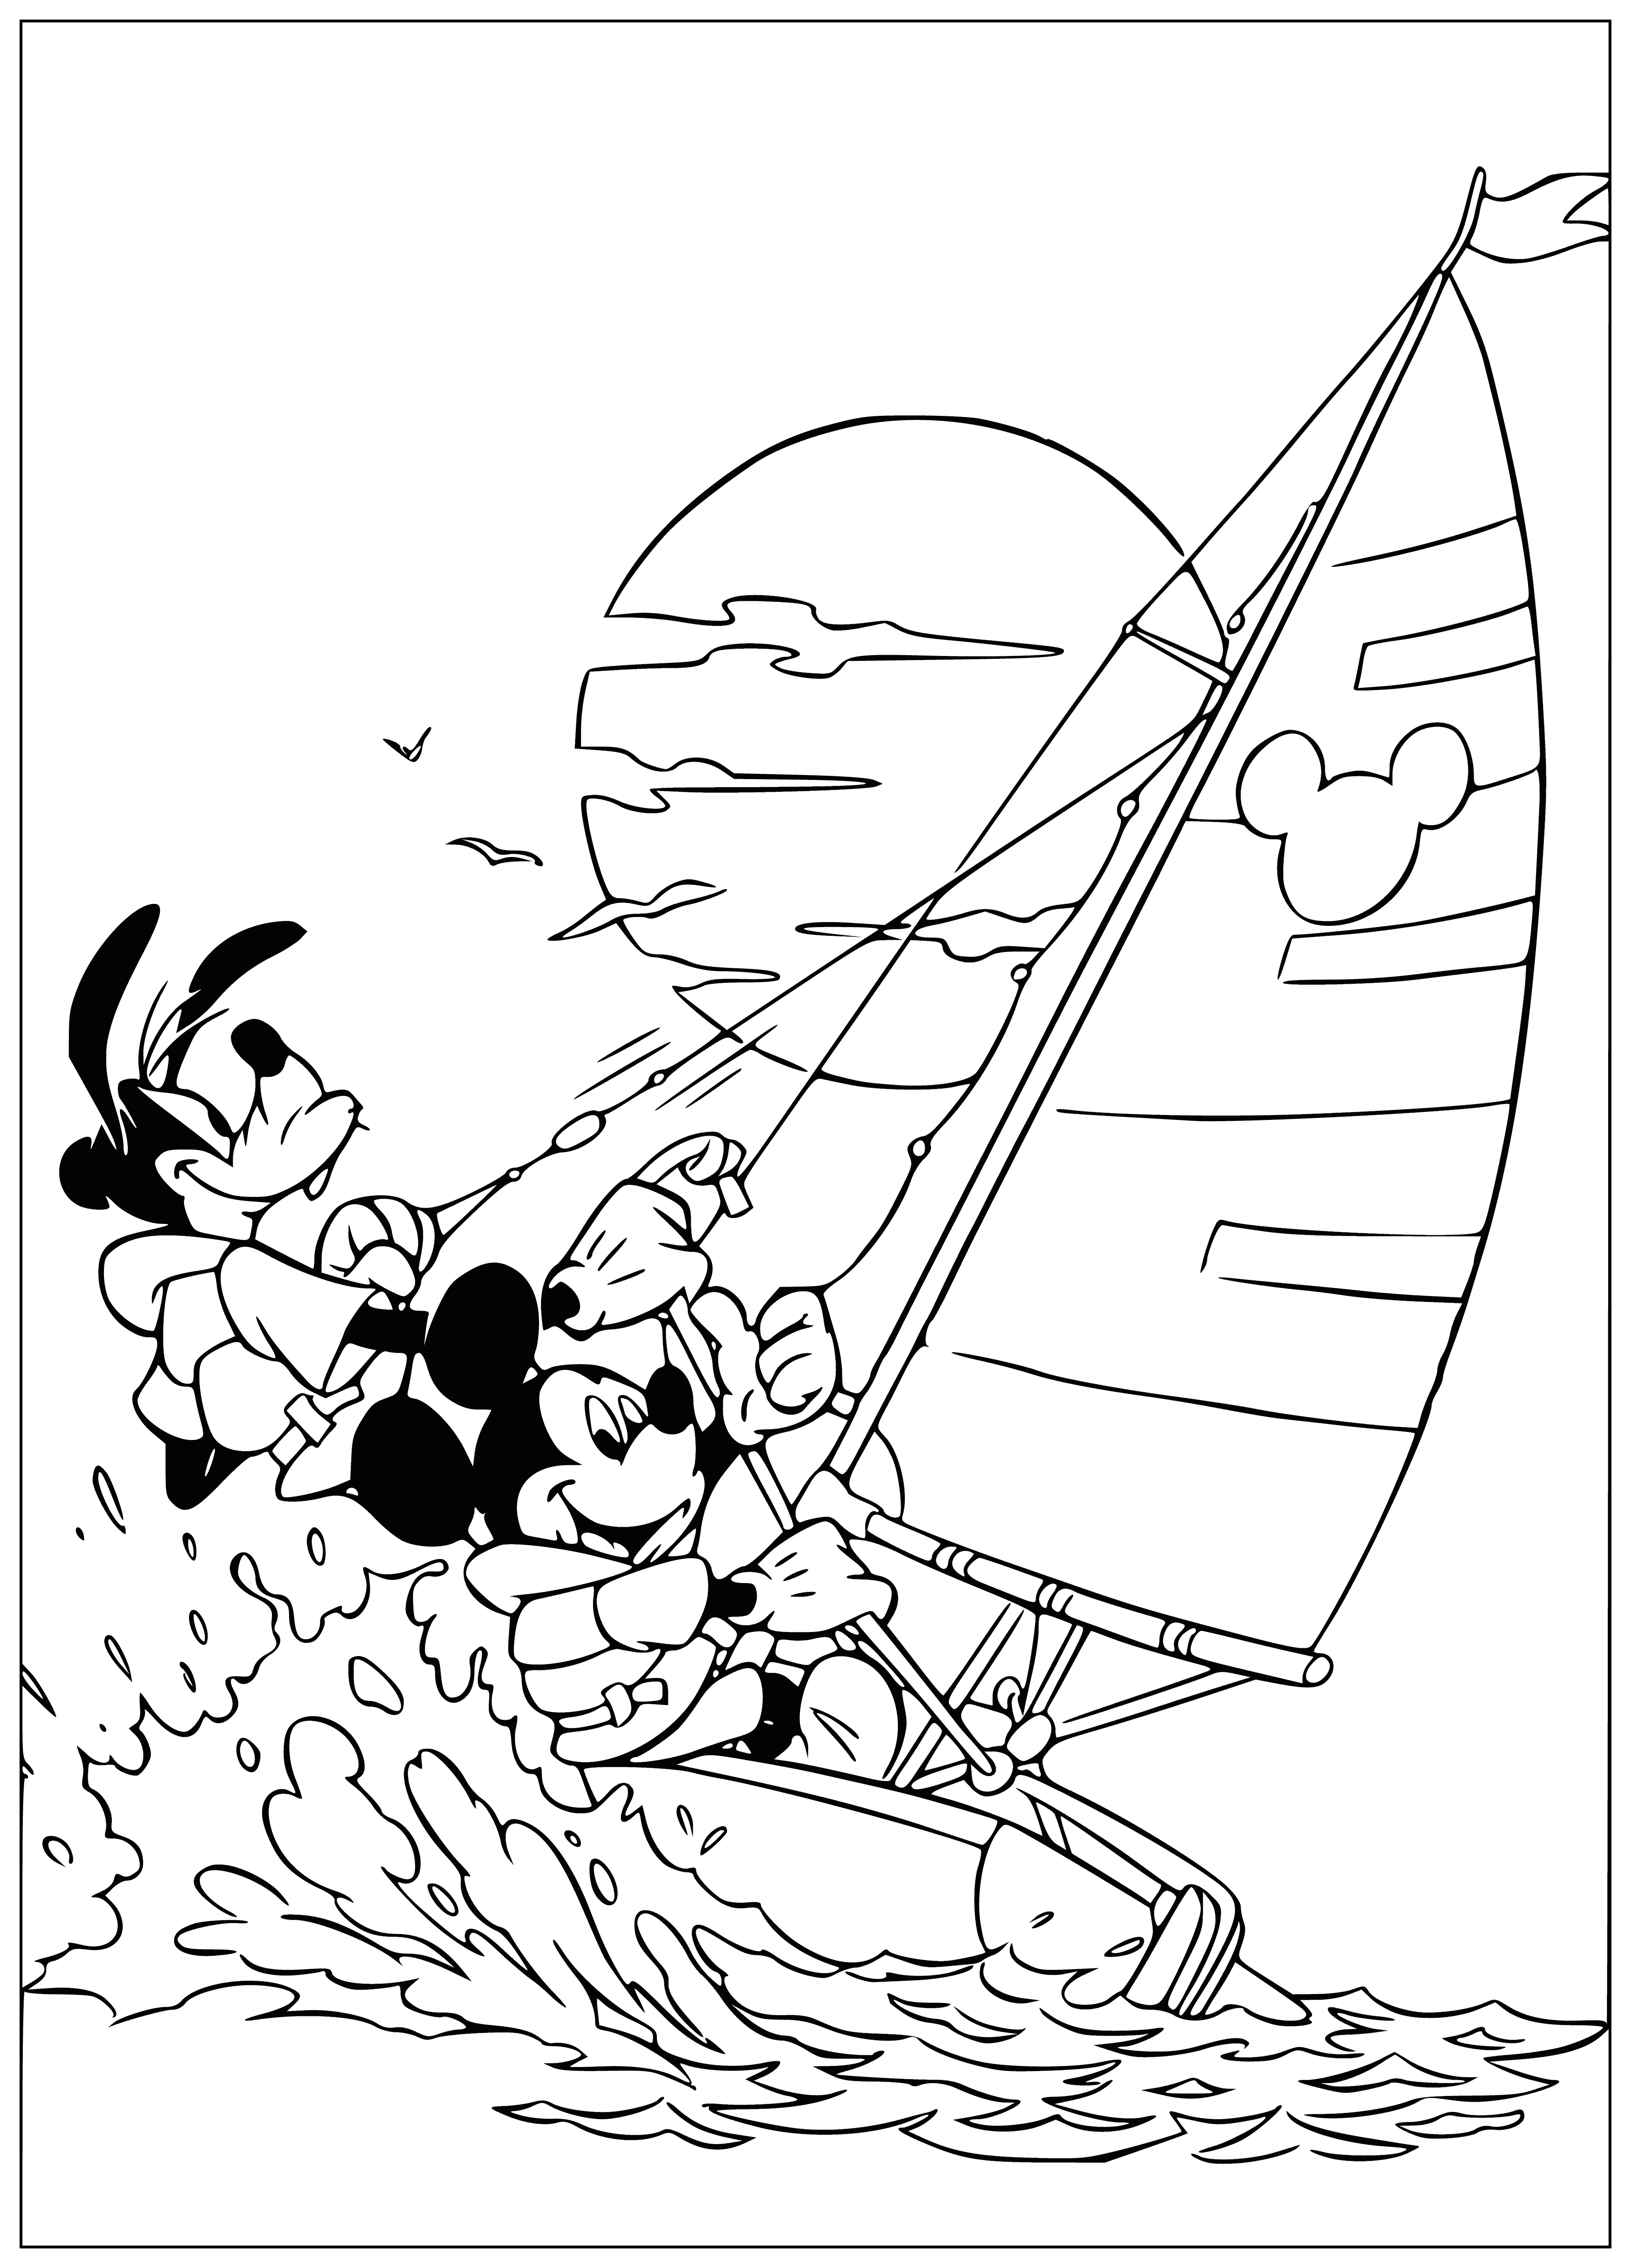 coloring page: Mickey & friends sailing on a yacht, happy & having fun in the sun with a blue sky!